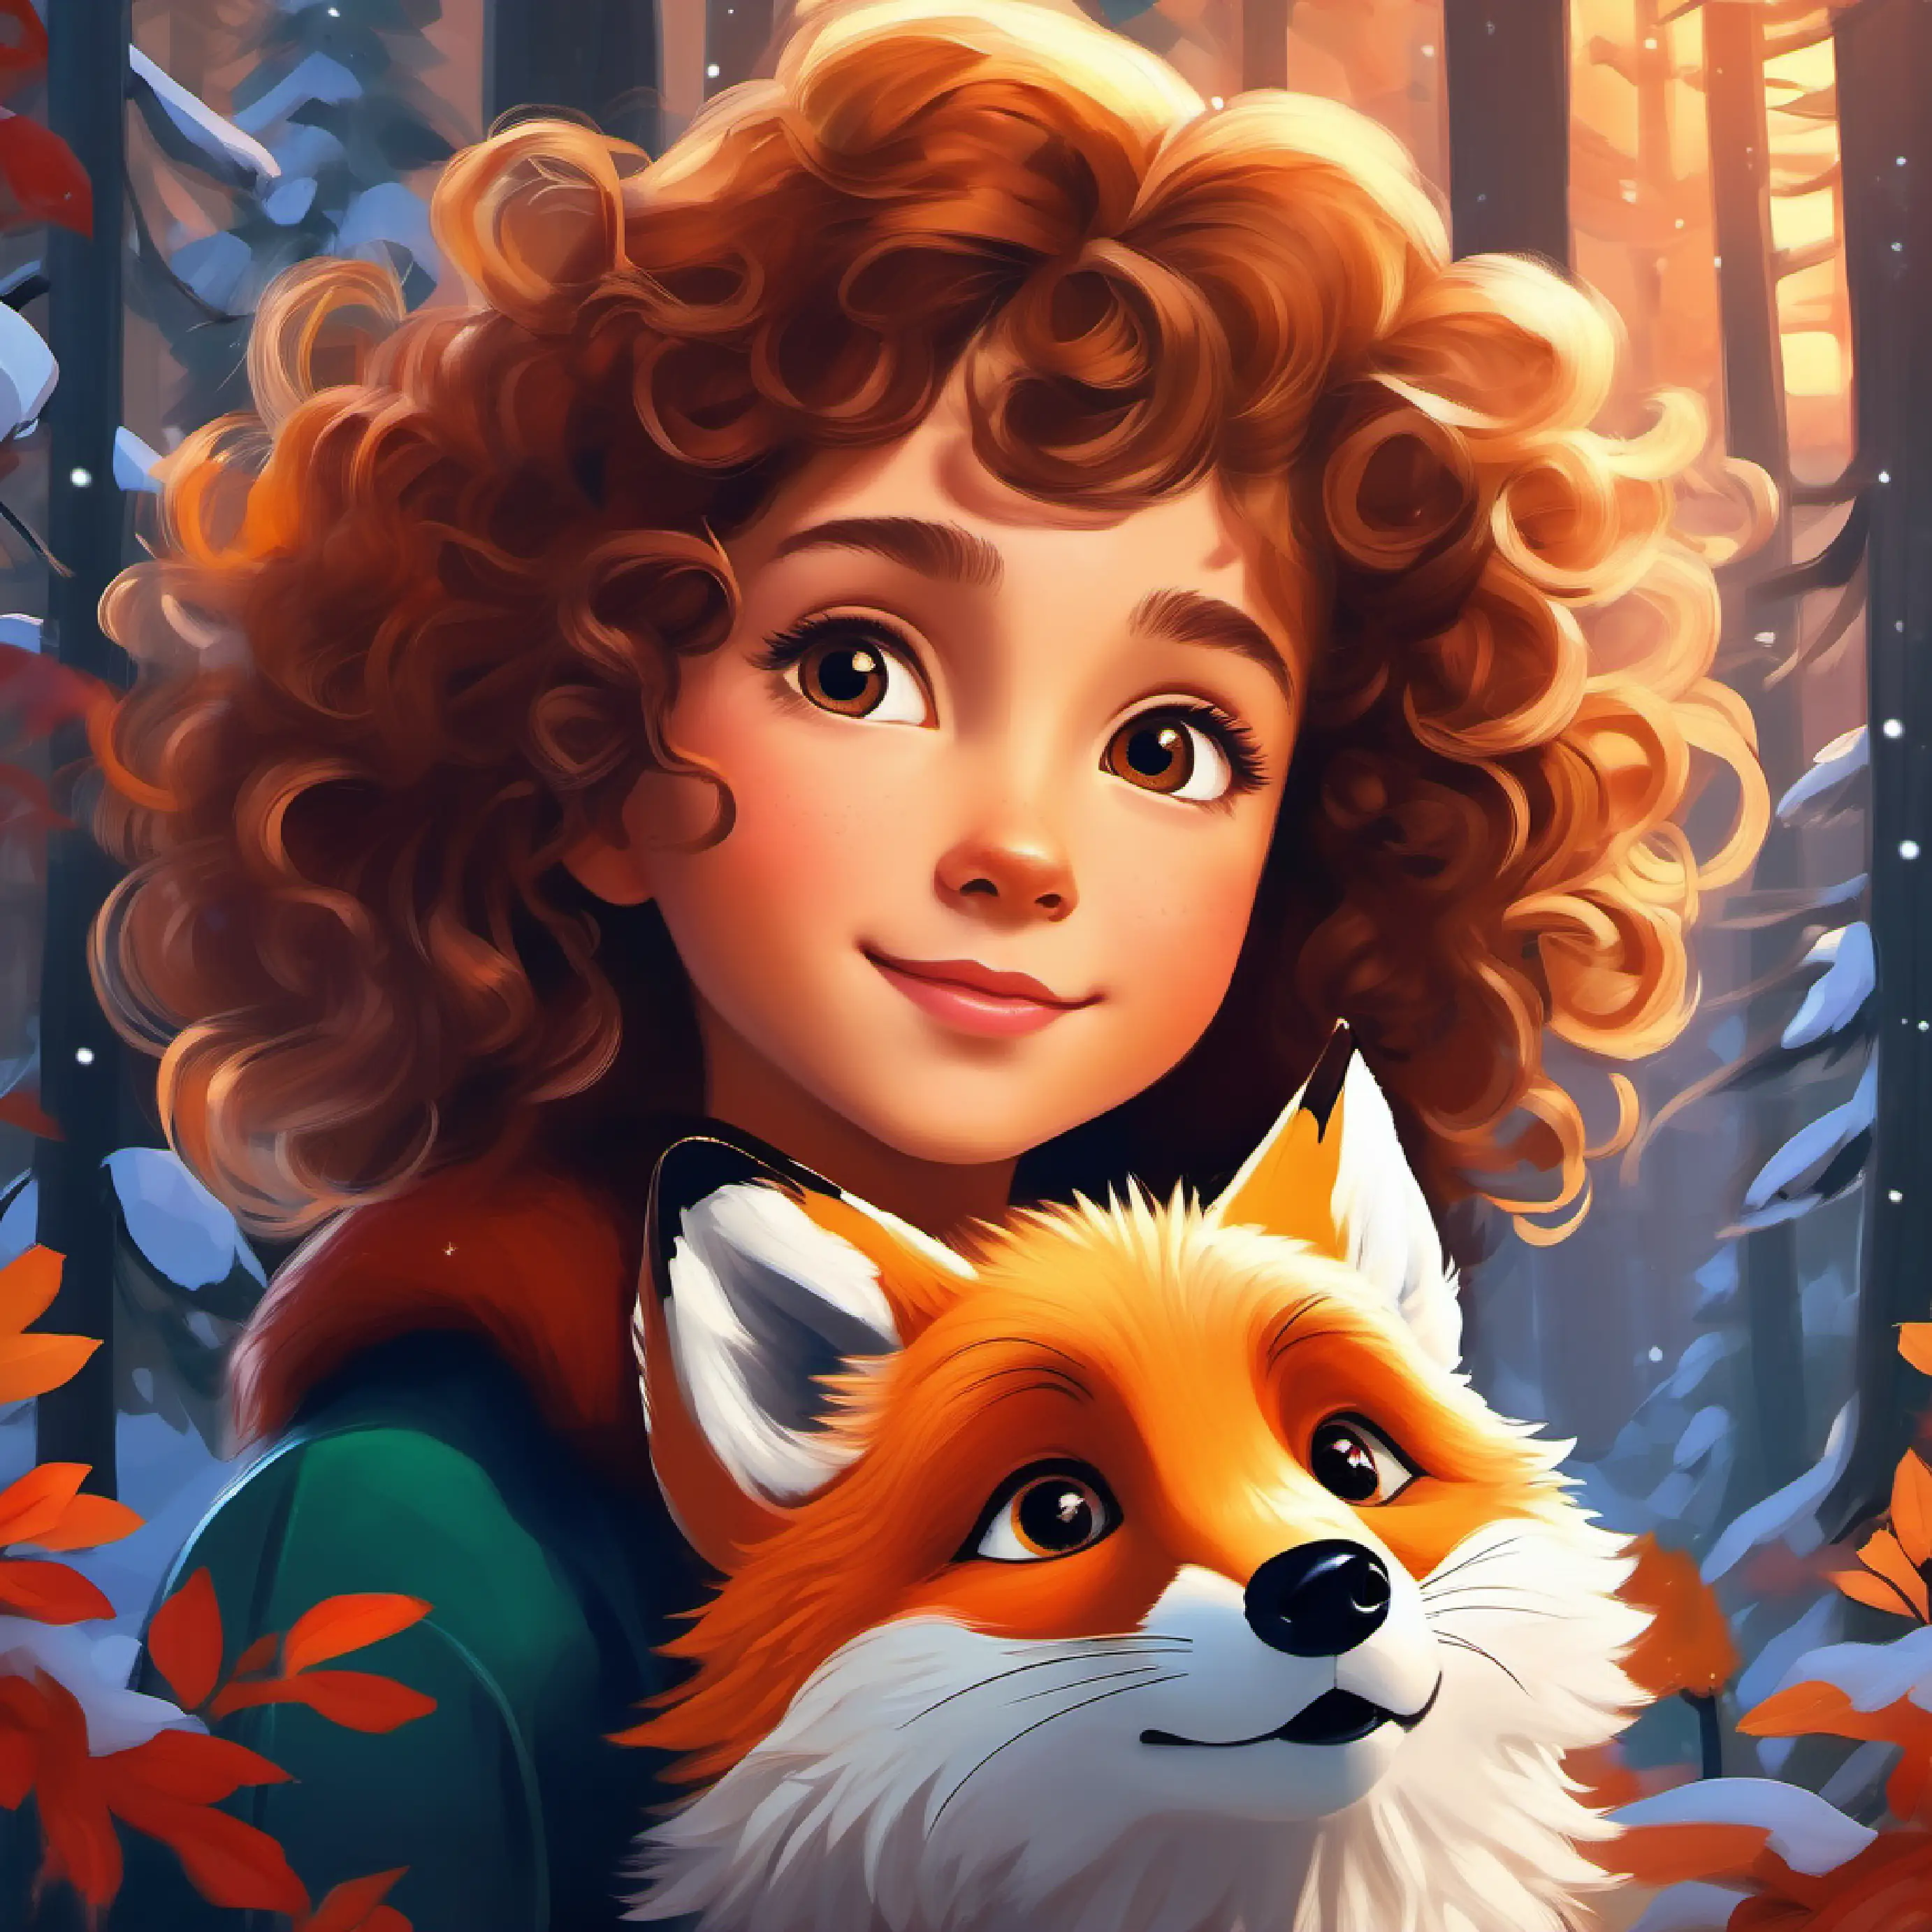 Curly-haired girl with amber eyes, spirited and dreamy's dream movie about a lost fox cub seeking its mother in the forest.